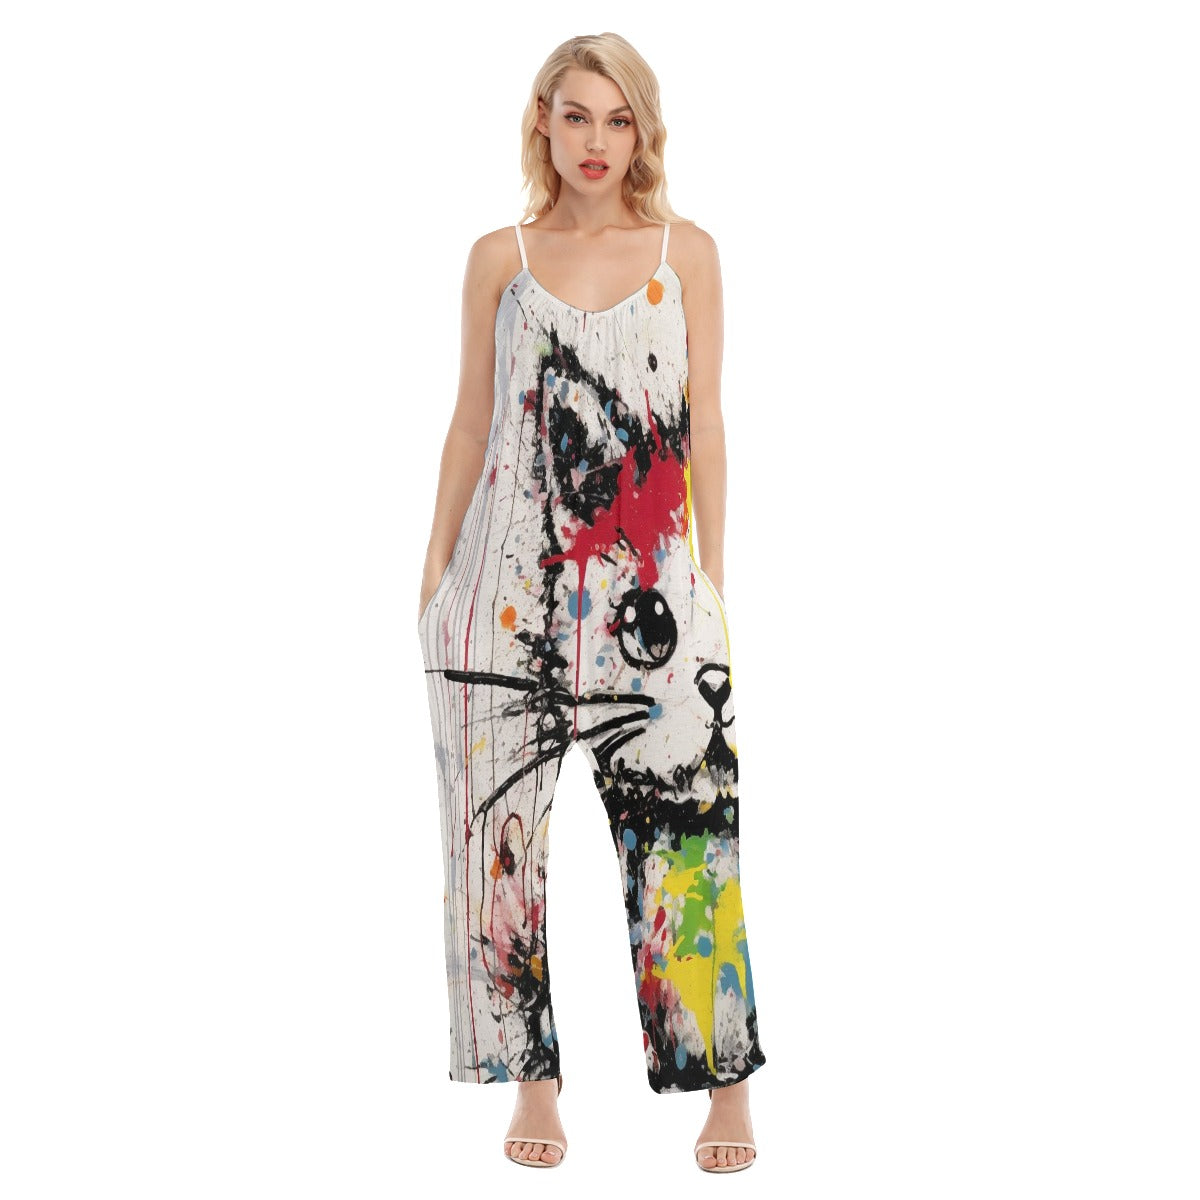 All-Over Print Women's Loose Cami Jumpsuit